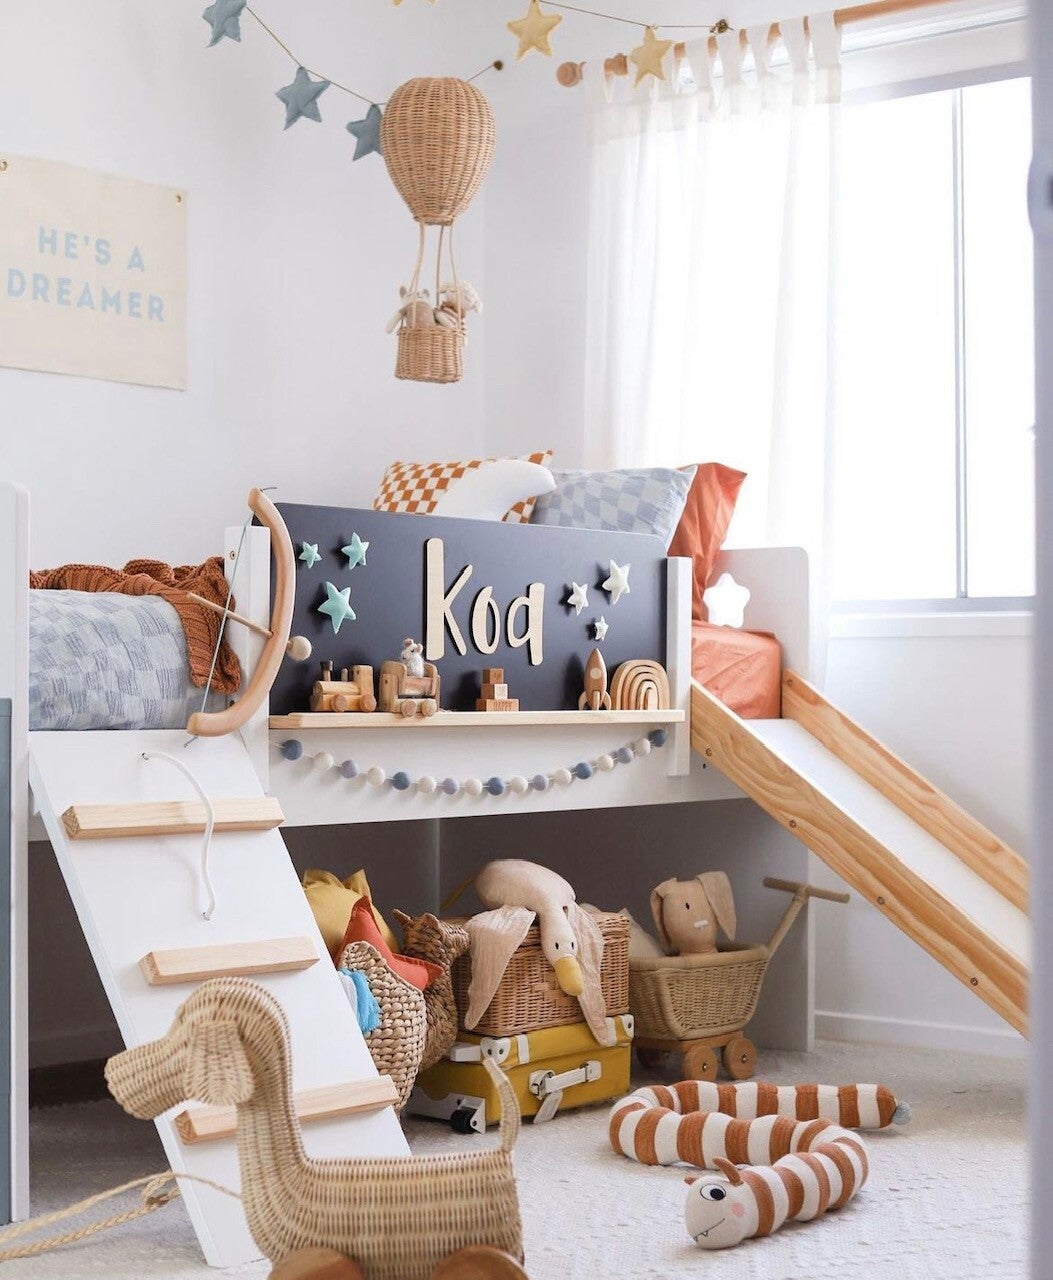 The Galaxy Kids Bed